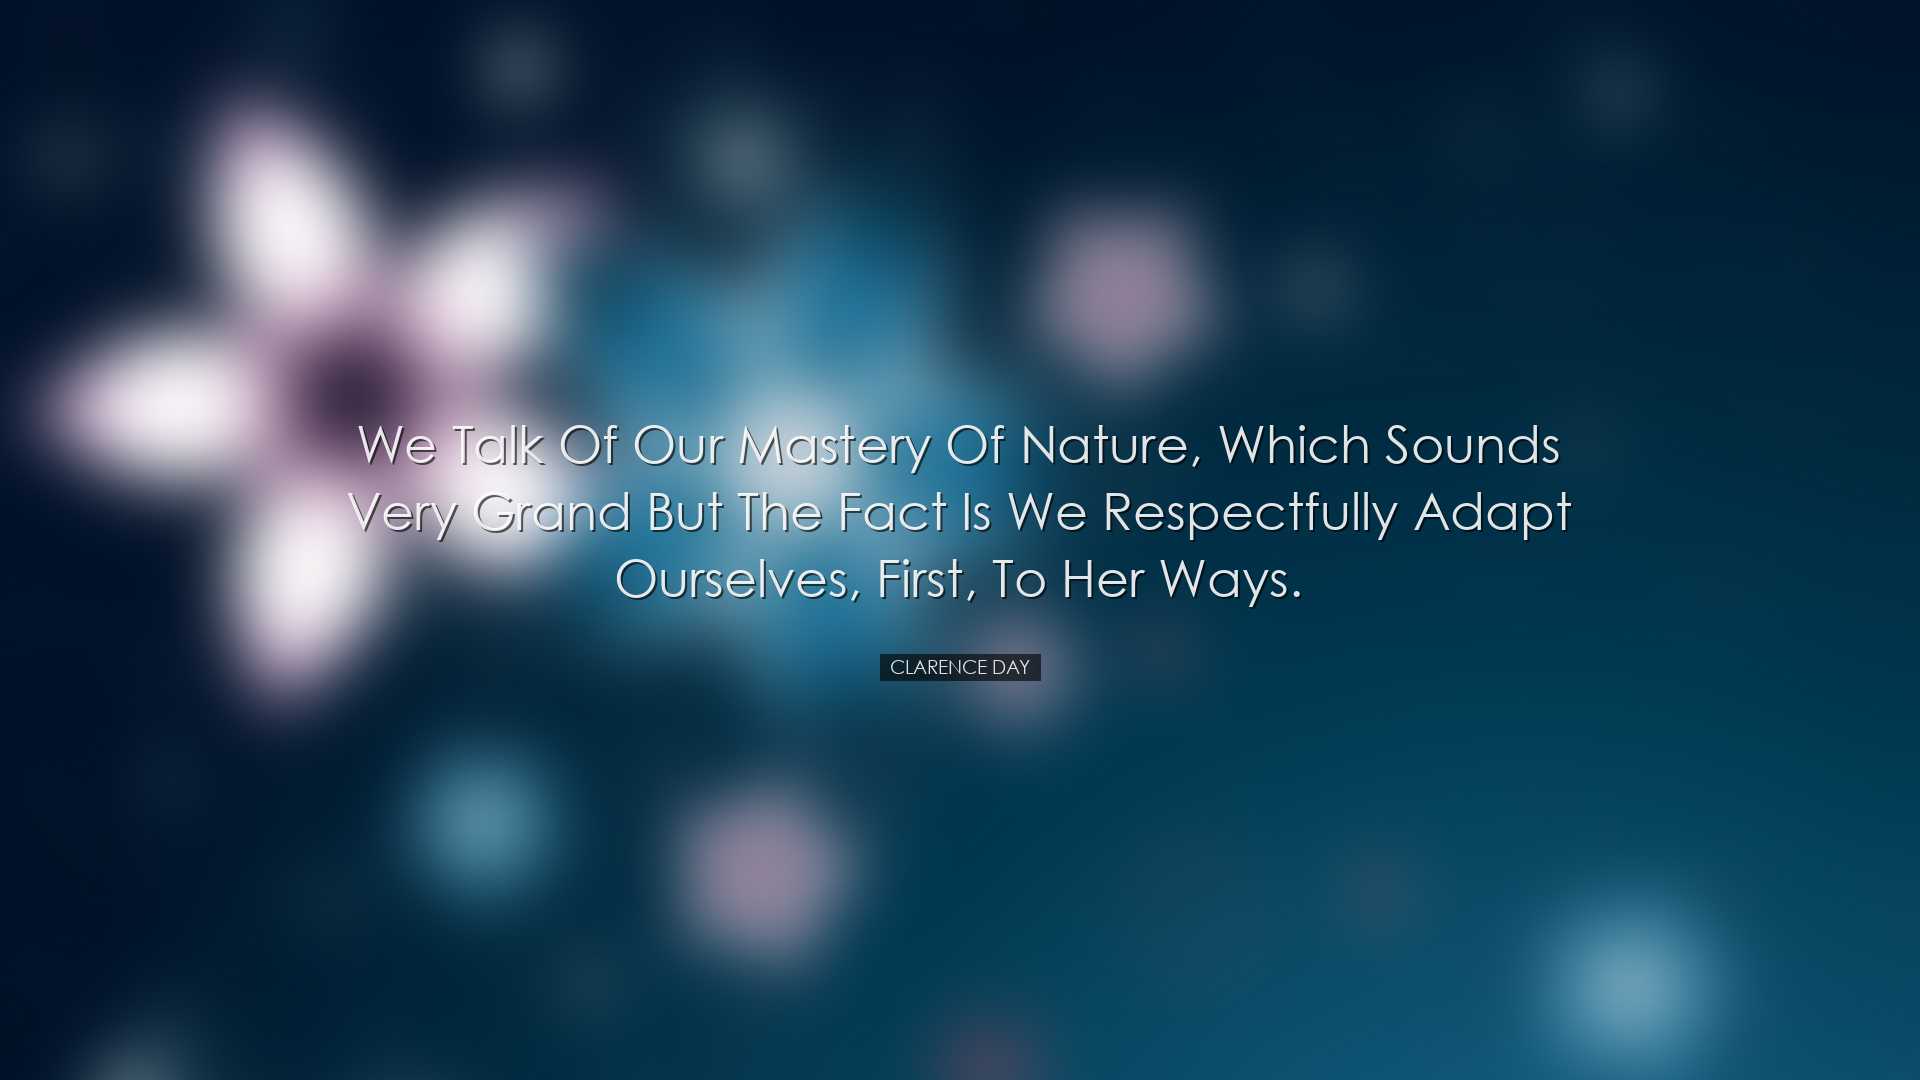 We talk of our mastery of nature, which sounds very grand but the